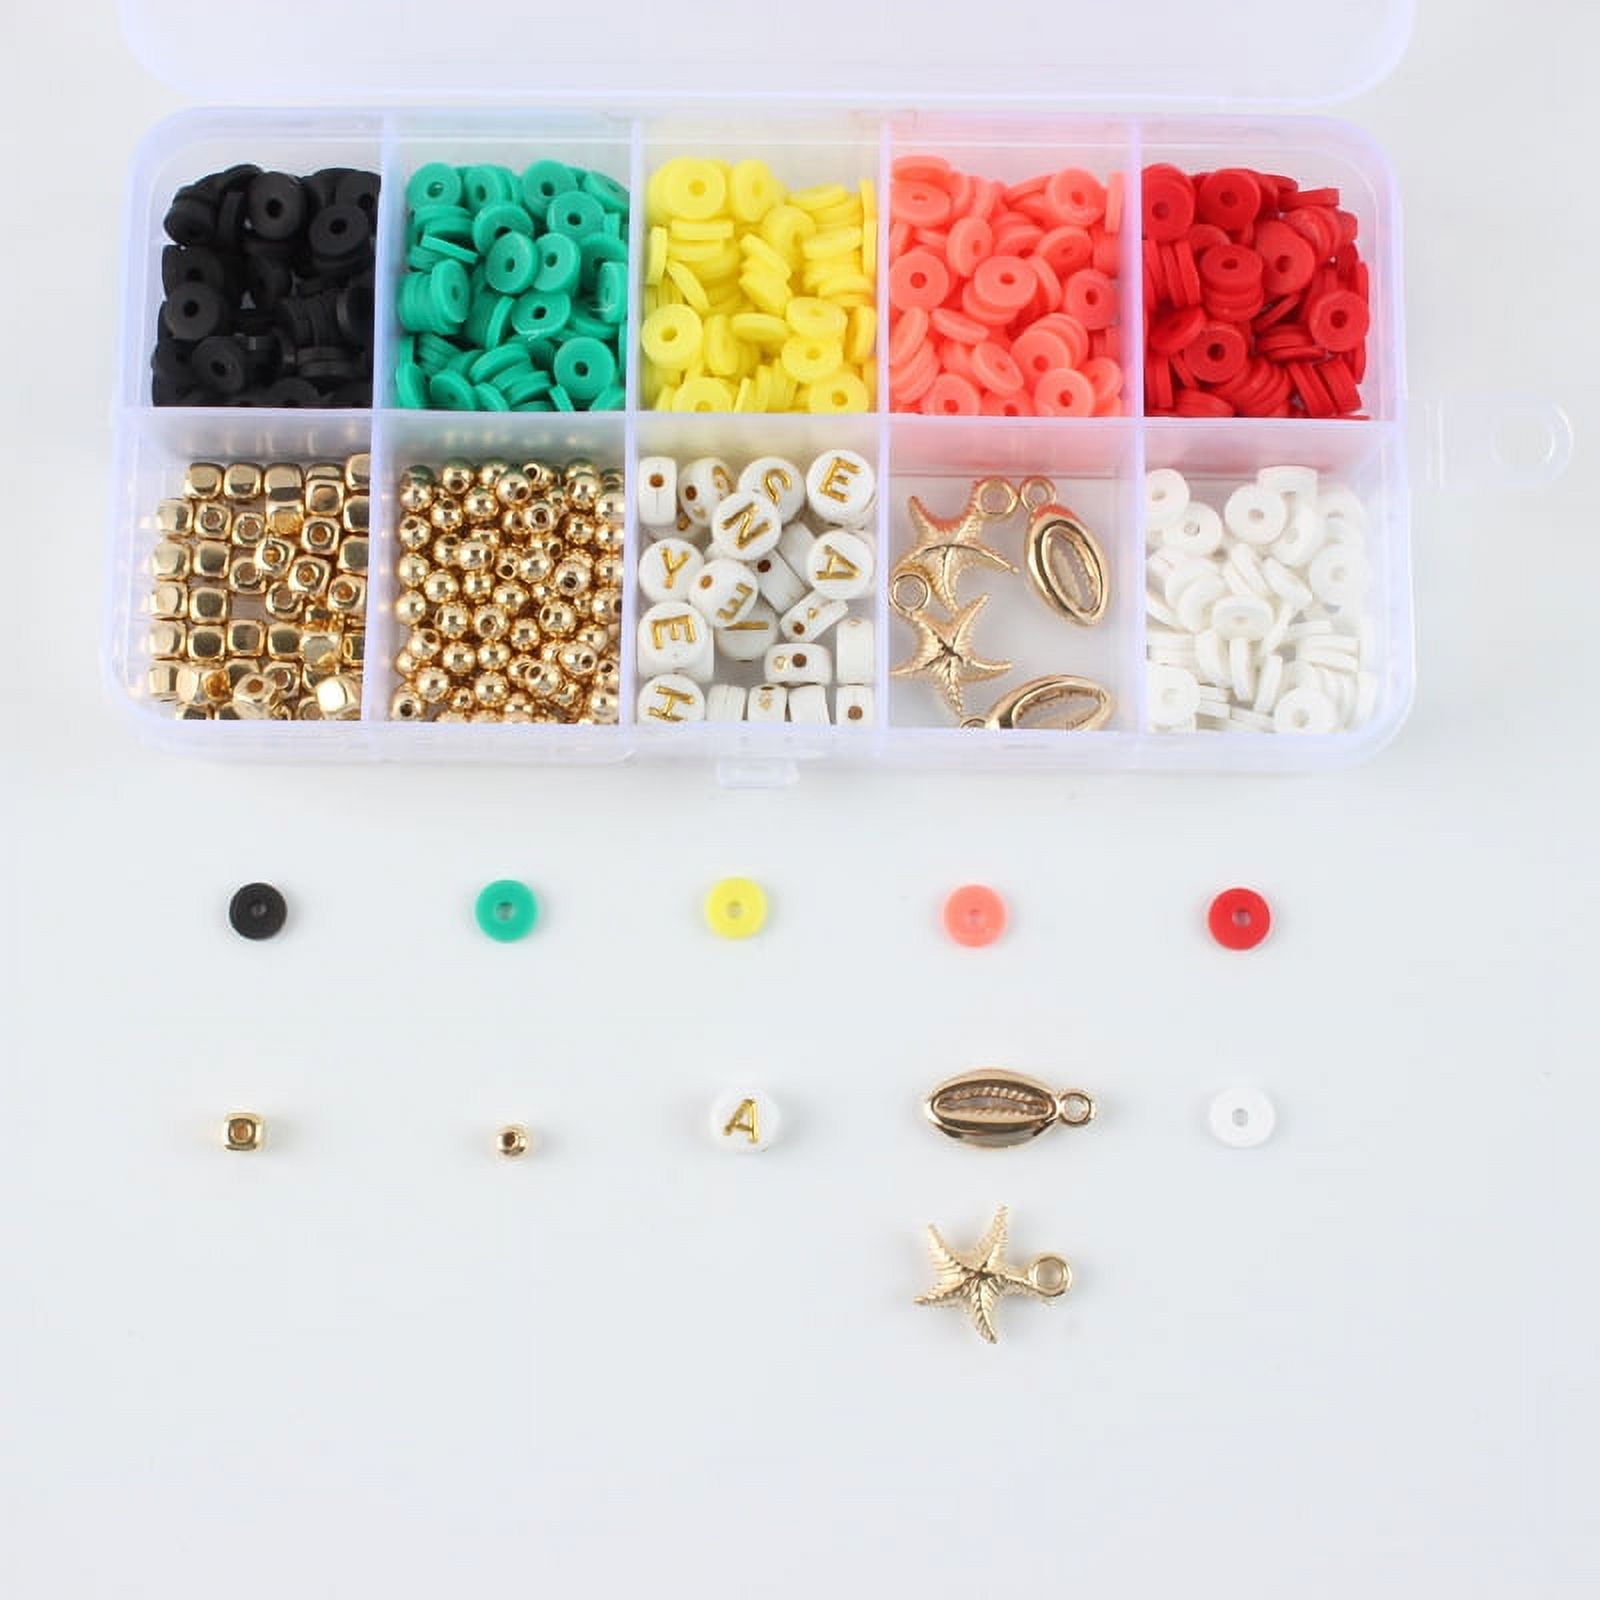 Electric Clay Bead Spinner Kit with 2000PCS Clay Beads, Bead